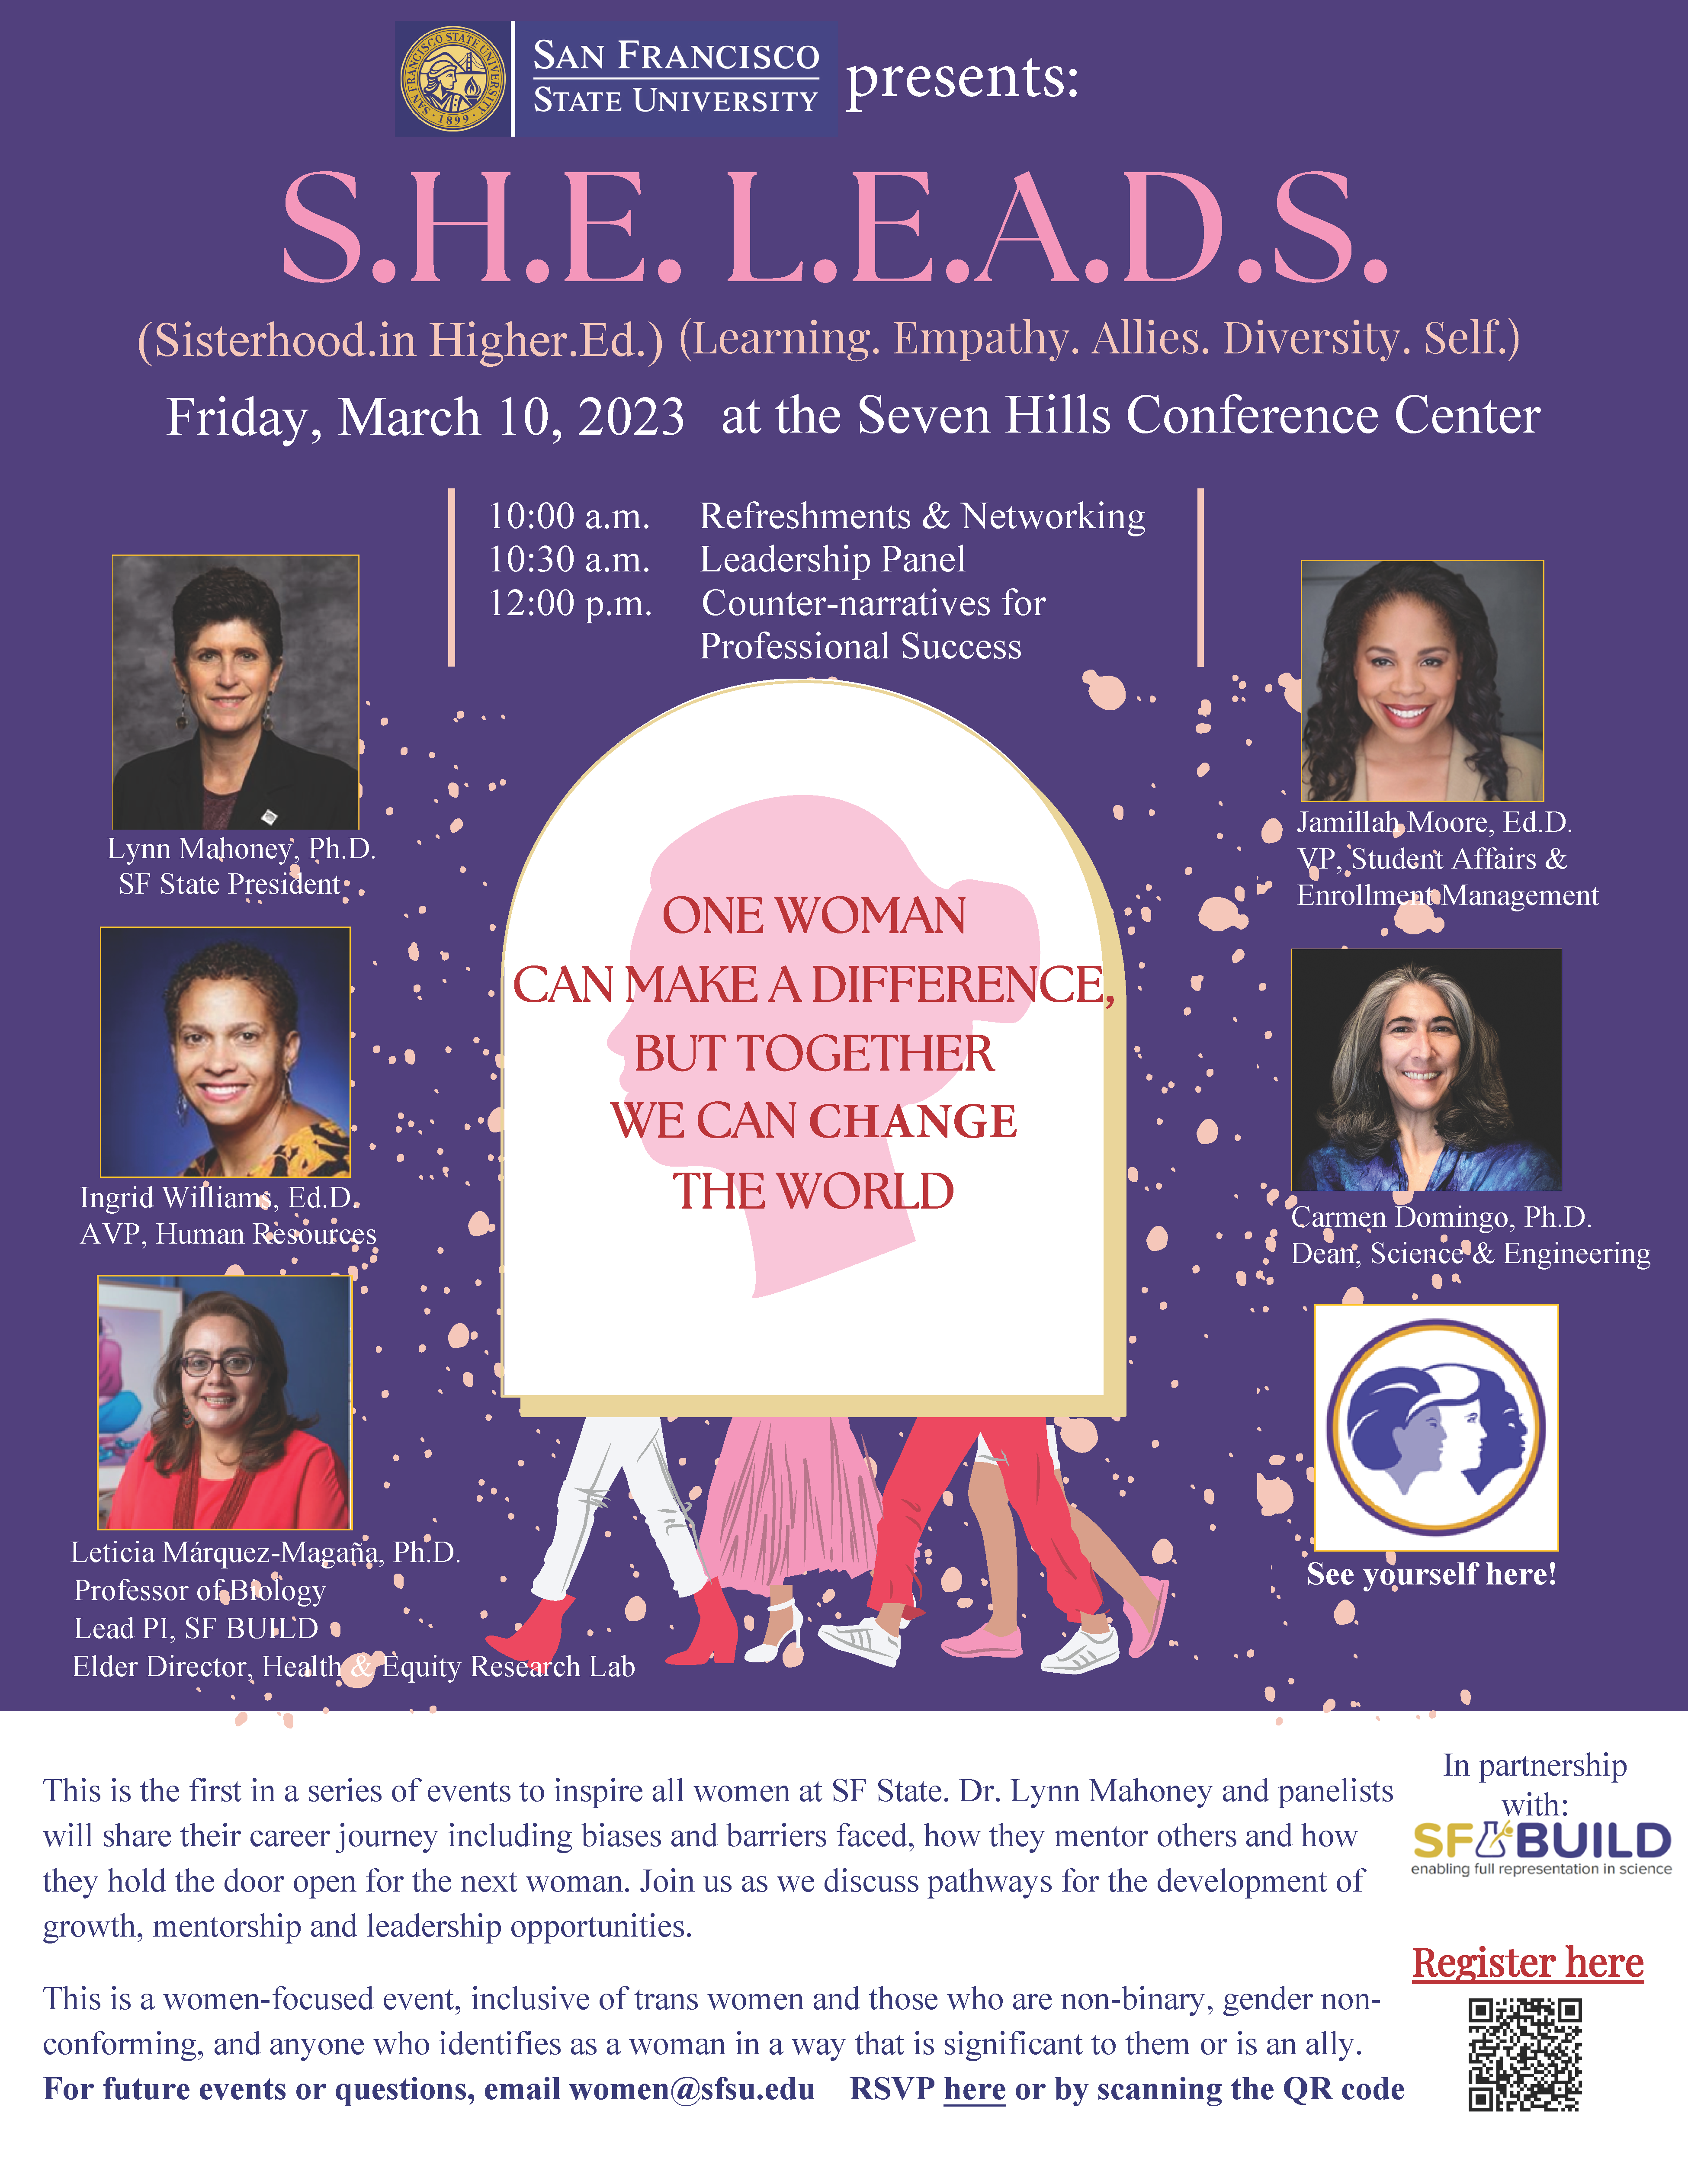 Flyer for SHE LEADS event on March 10, 2023